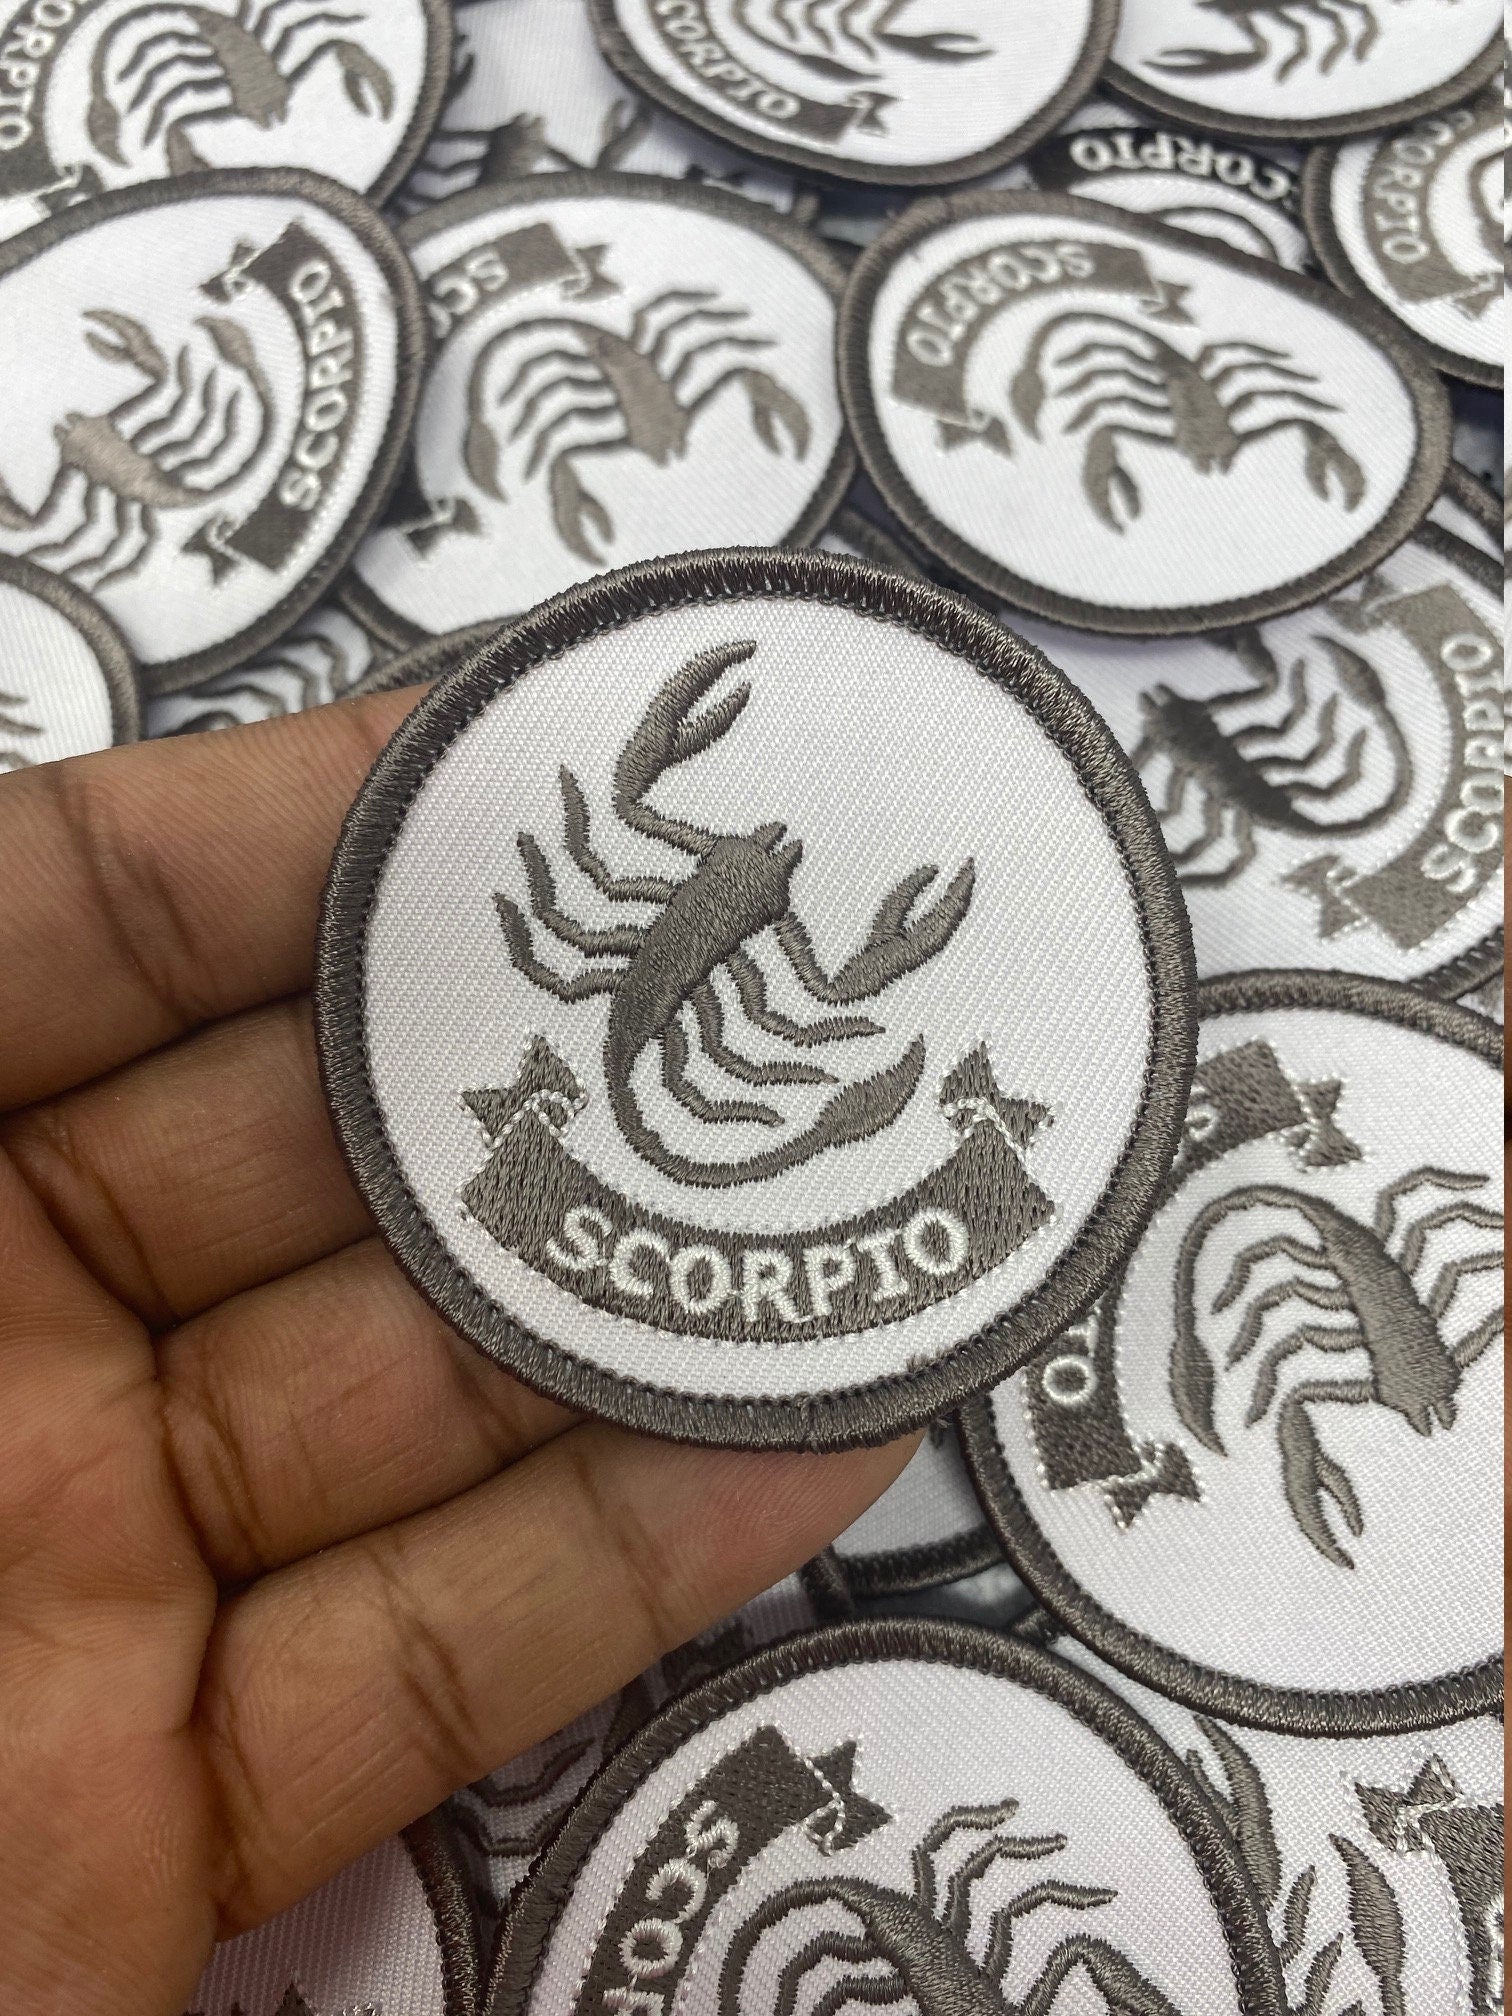 NEW, Fun, Vintage "Scorpio" Astrology Iron-On Patch, Embroidered Zodiac Signs, 1 Pc., 3 inch